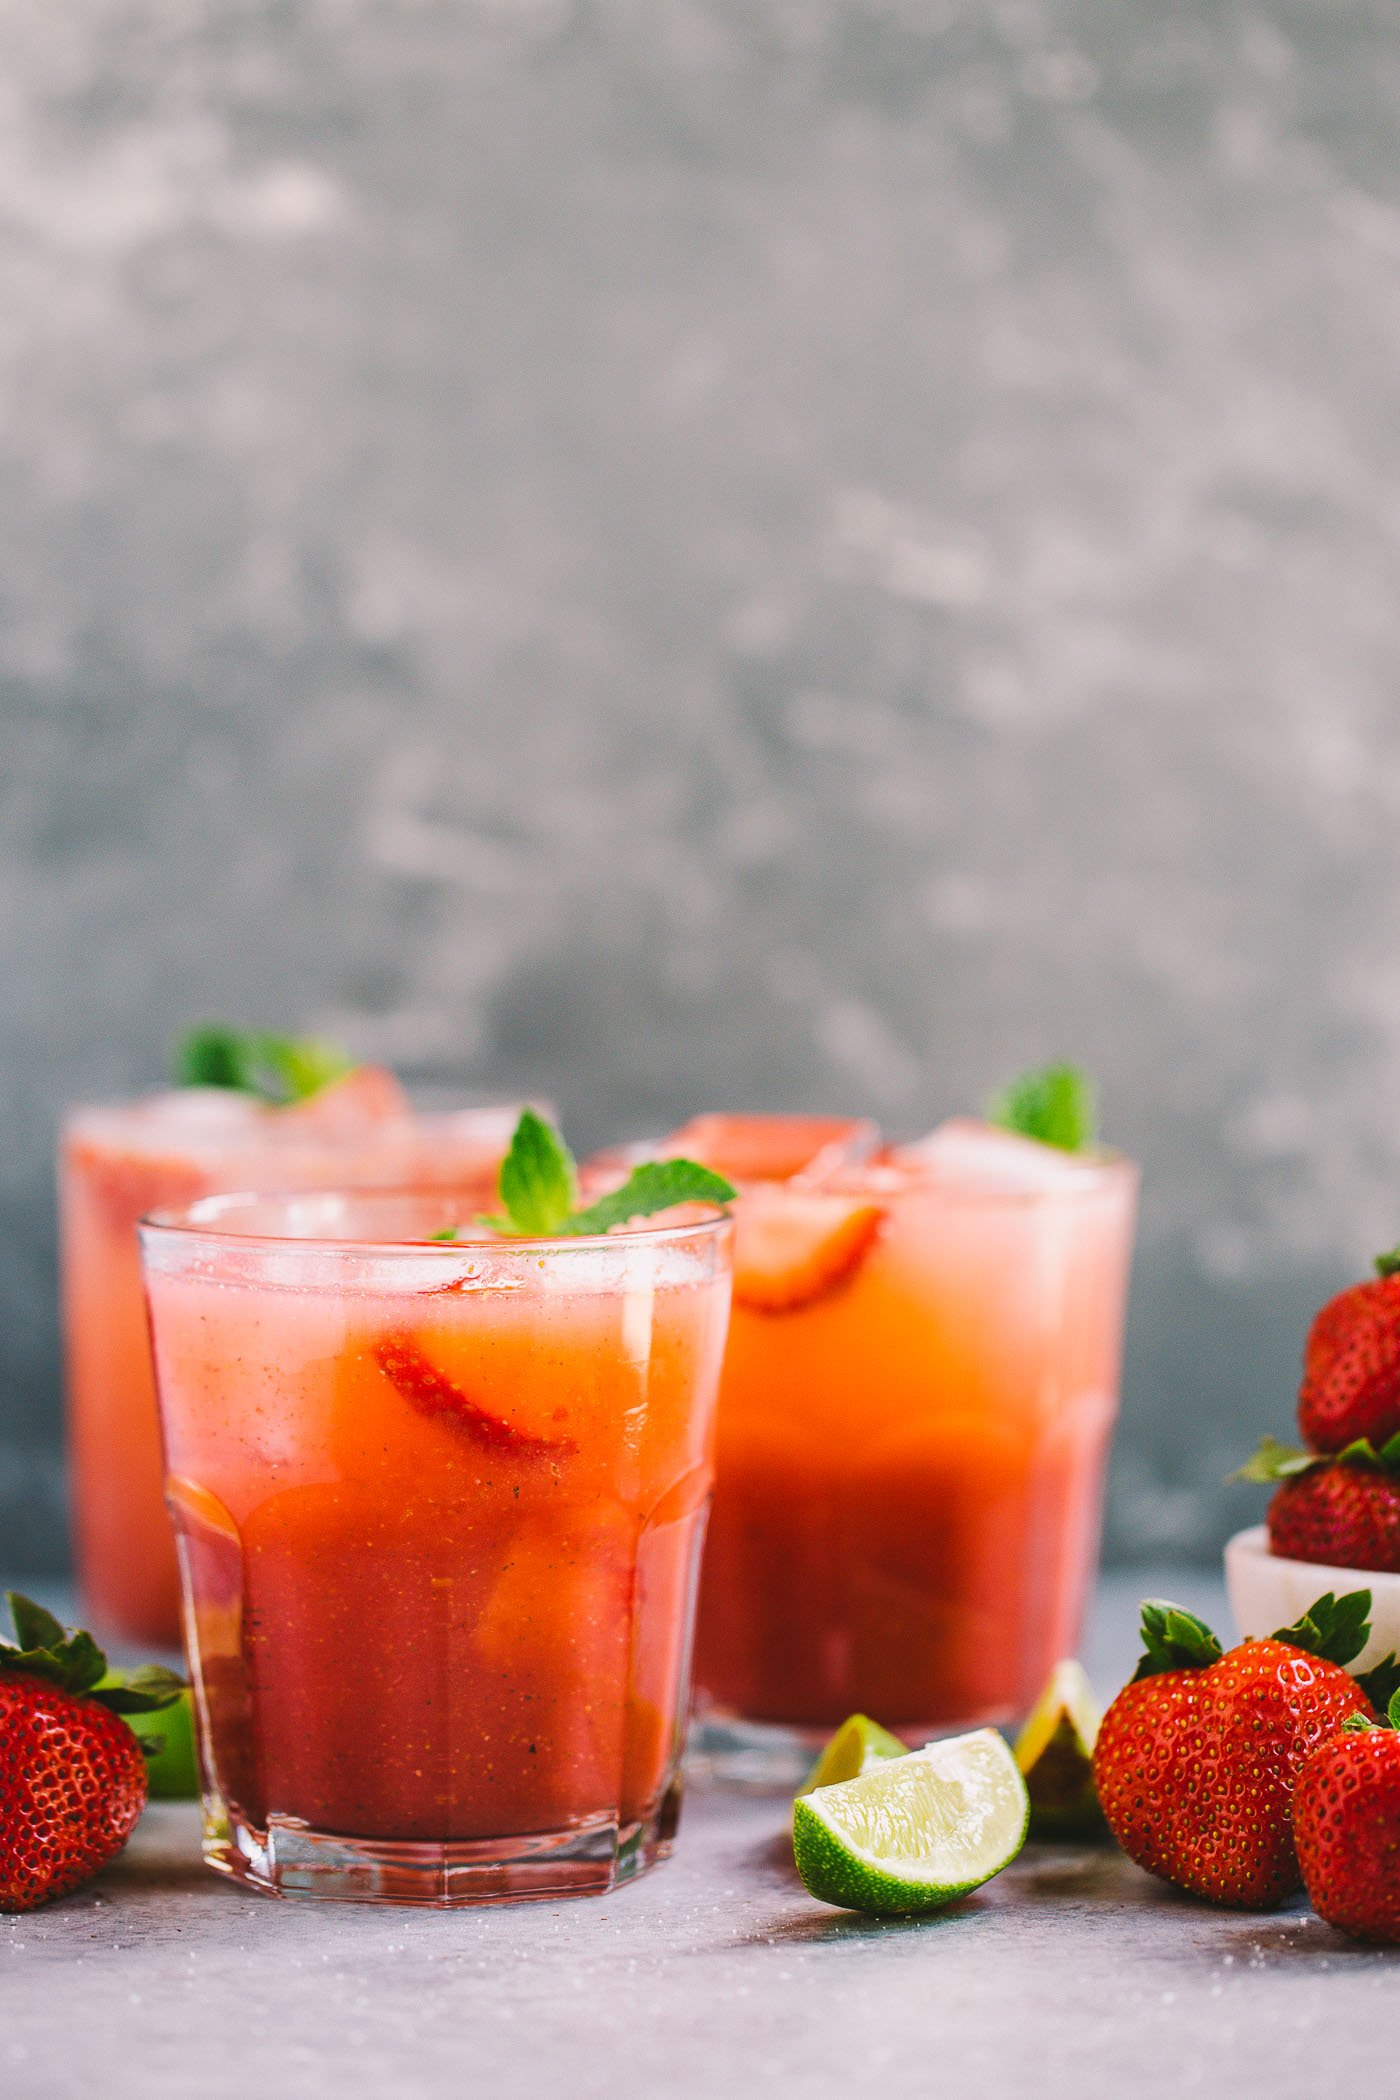 classic mojitos get a spicy strawberry twist in this easy cocktail recipe for spicy strawberry mojitos! fresh strawberries muddled with lime juice, mint, & spicy rum for the perfectly balanced spicy & sweet cocktails. these spicy strawberry mojitos will be your new favorite! #mojitos #easycocktail #cocktailrecipe #strawberrymojitos #spicystrawberrymojitos #playswellwithbutter